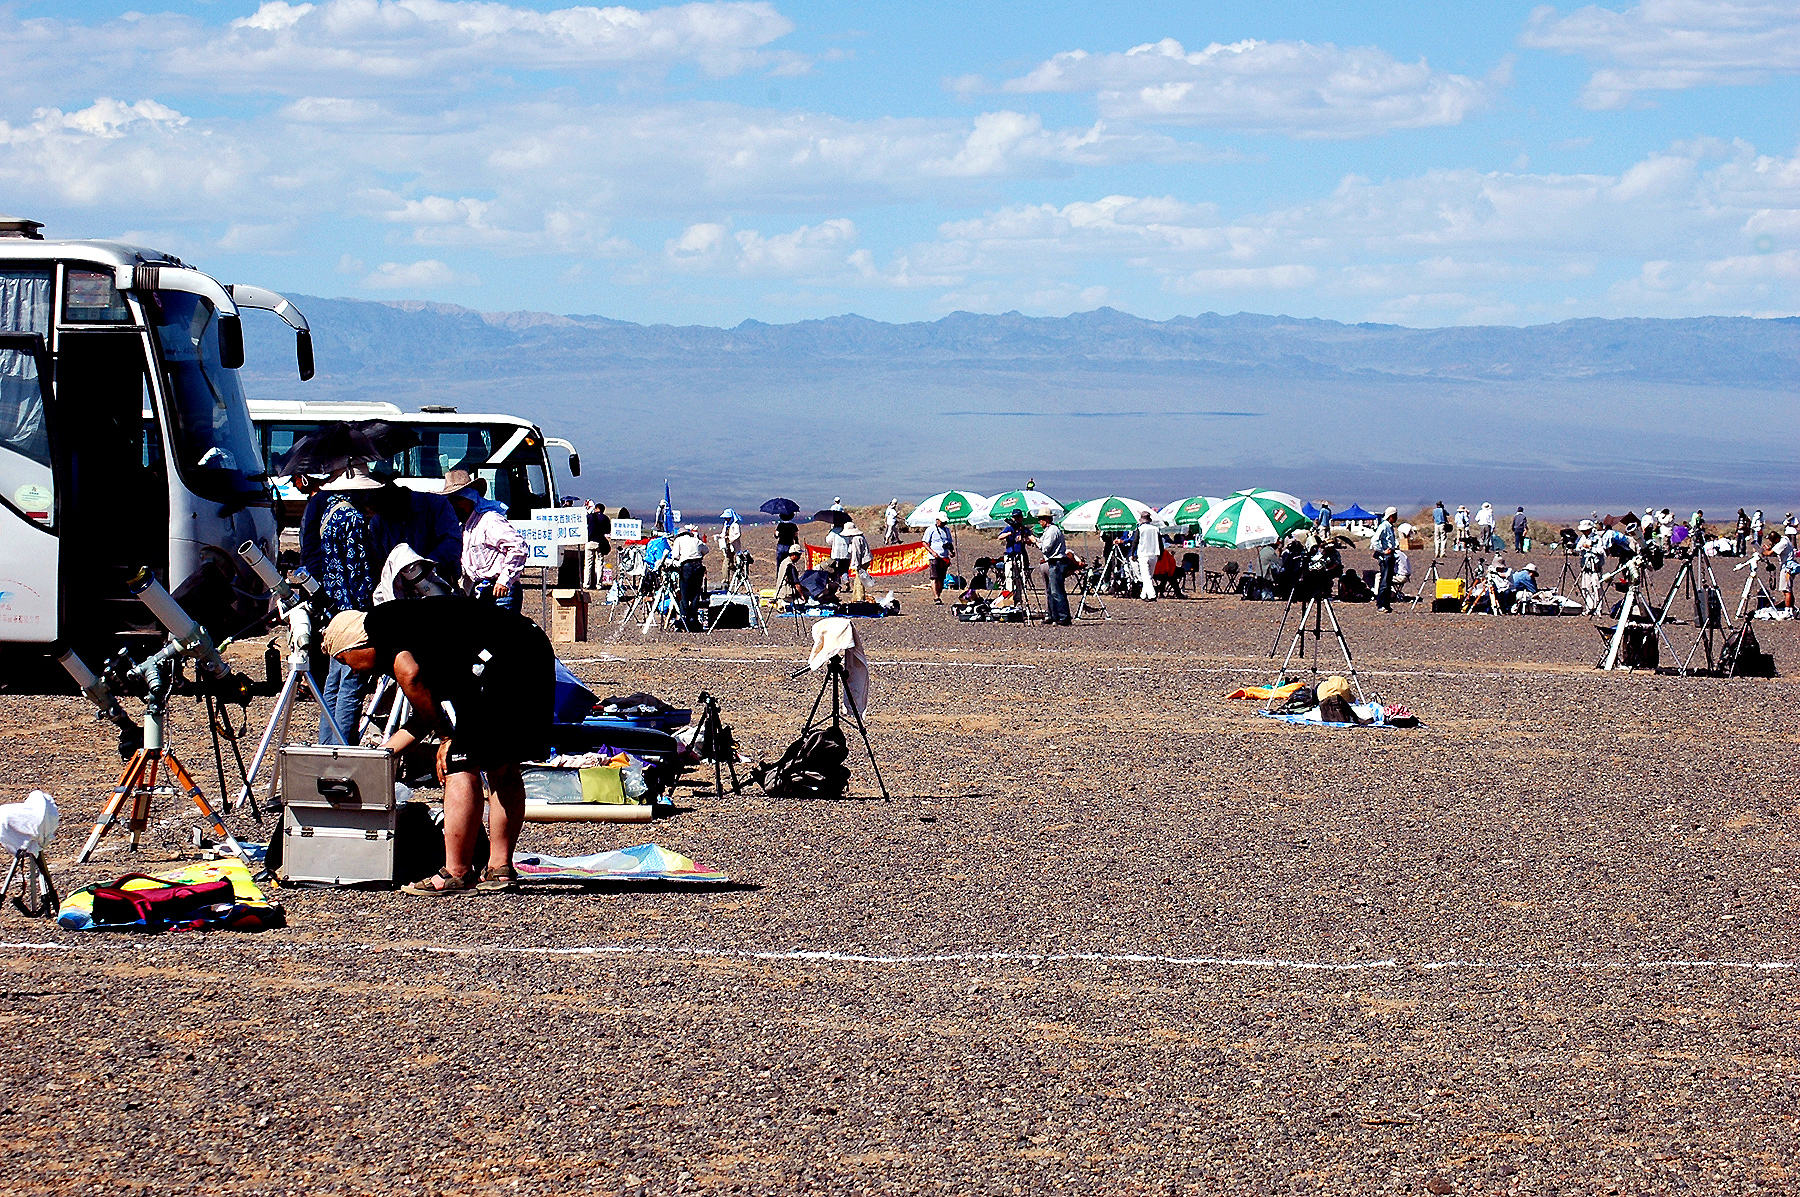 Eclipse 2008 - A60 - Setting up Telescopes in the Gobi